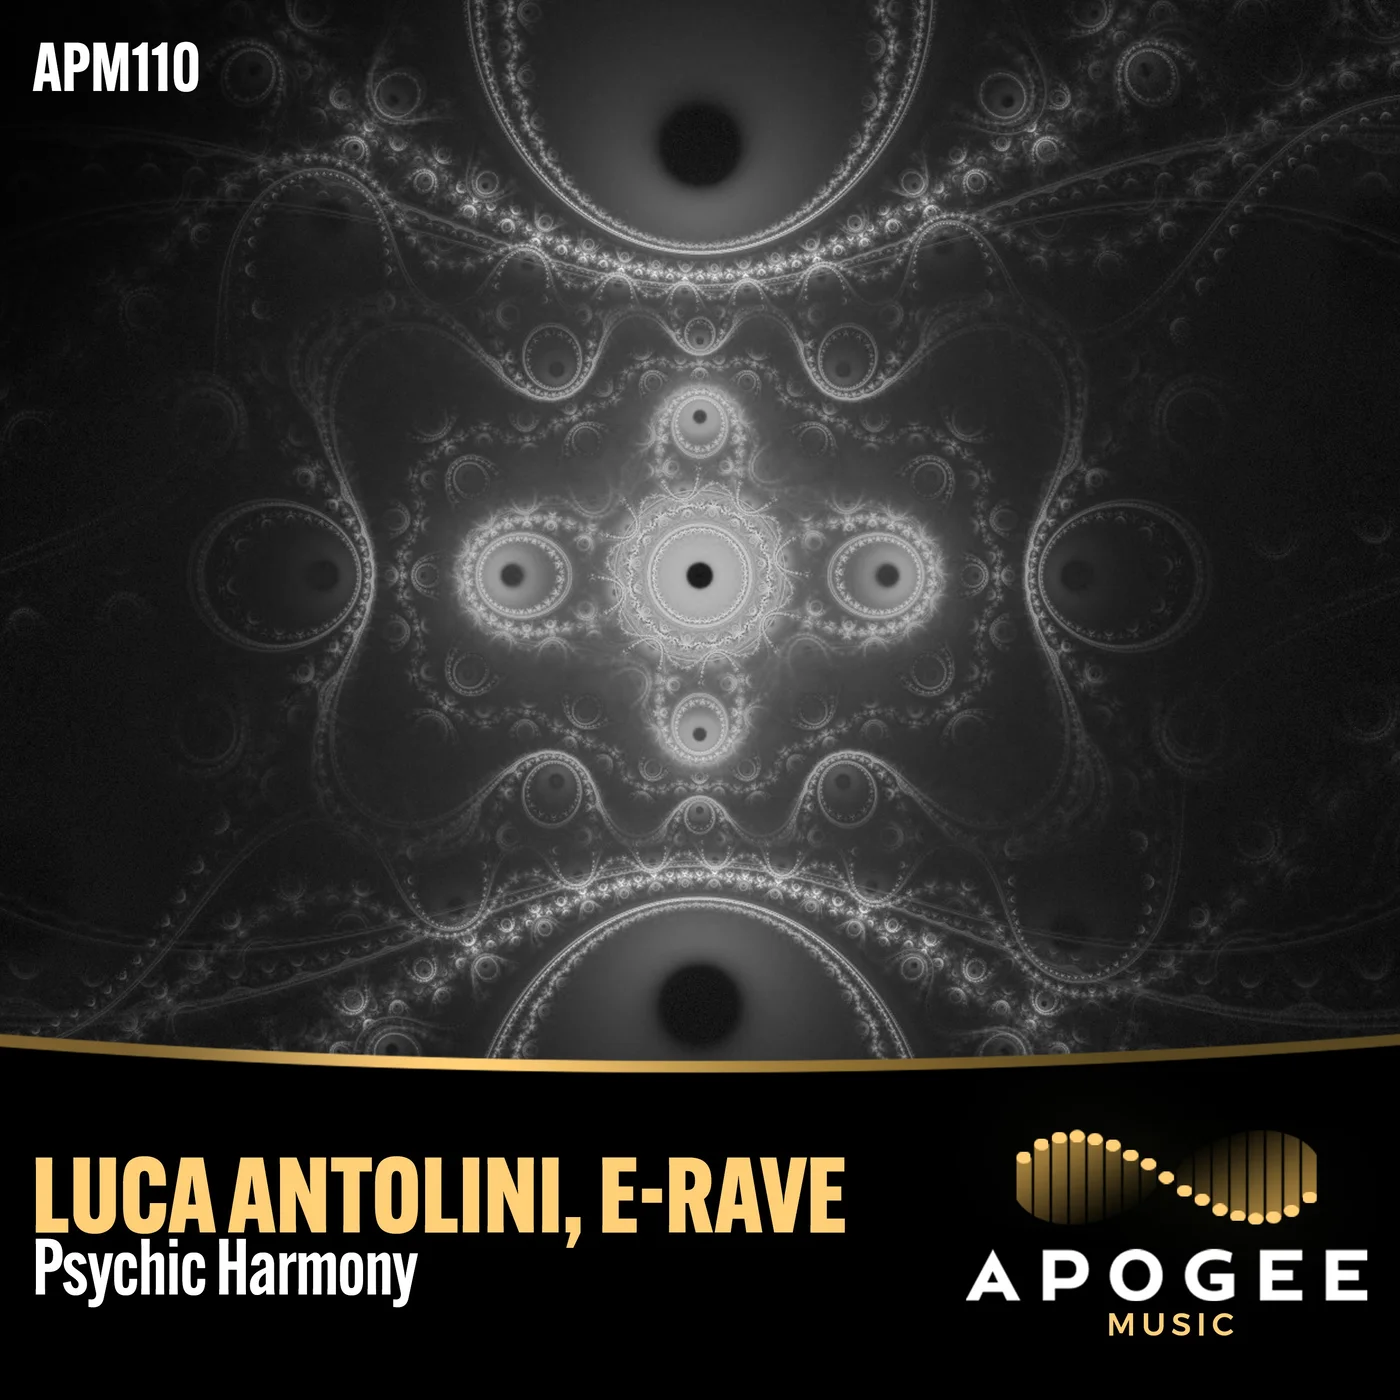 “Psychic Harmony” by Luca Antolini and E-Rave gets two amazing remixes